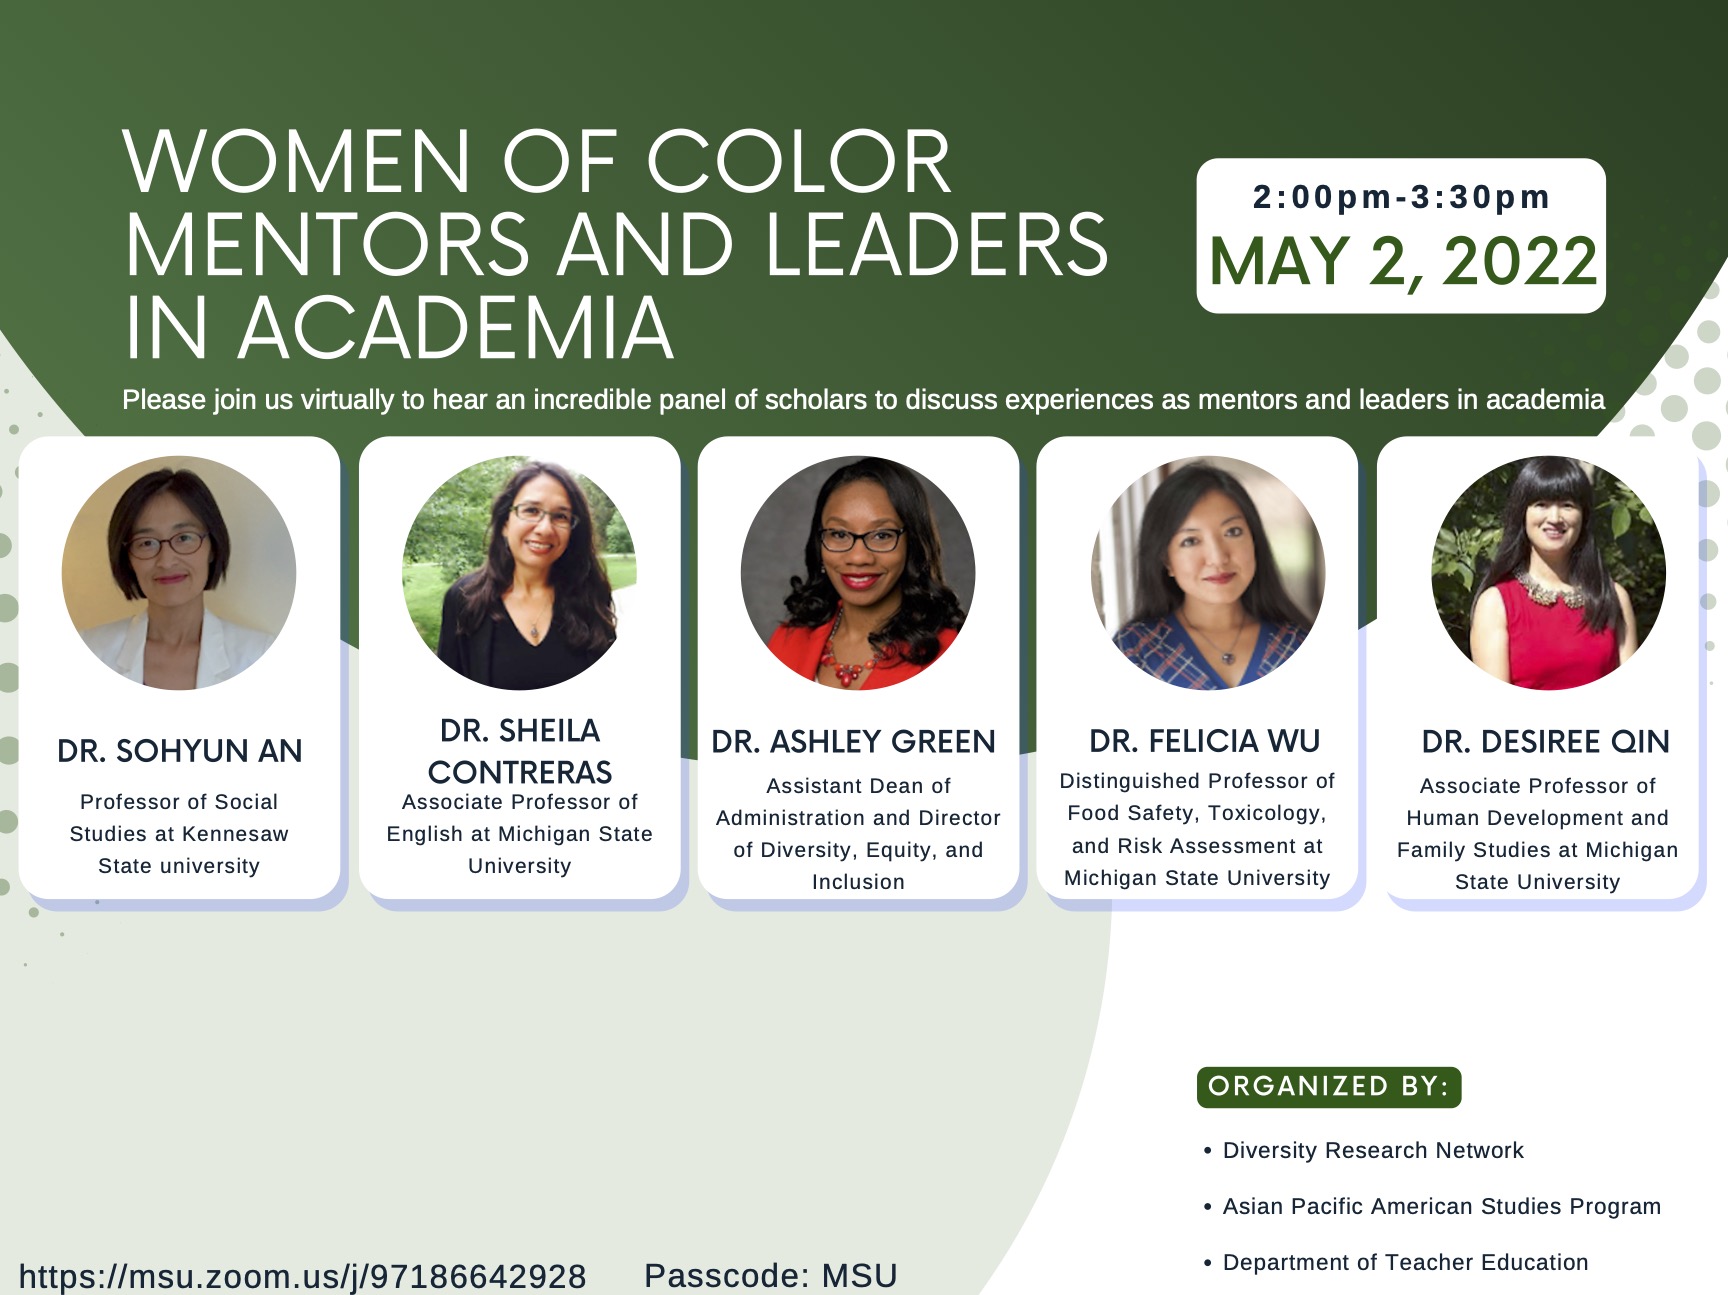 Women of Color Mentors and Leaders in Academia flyer